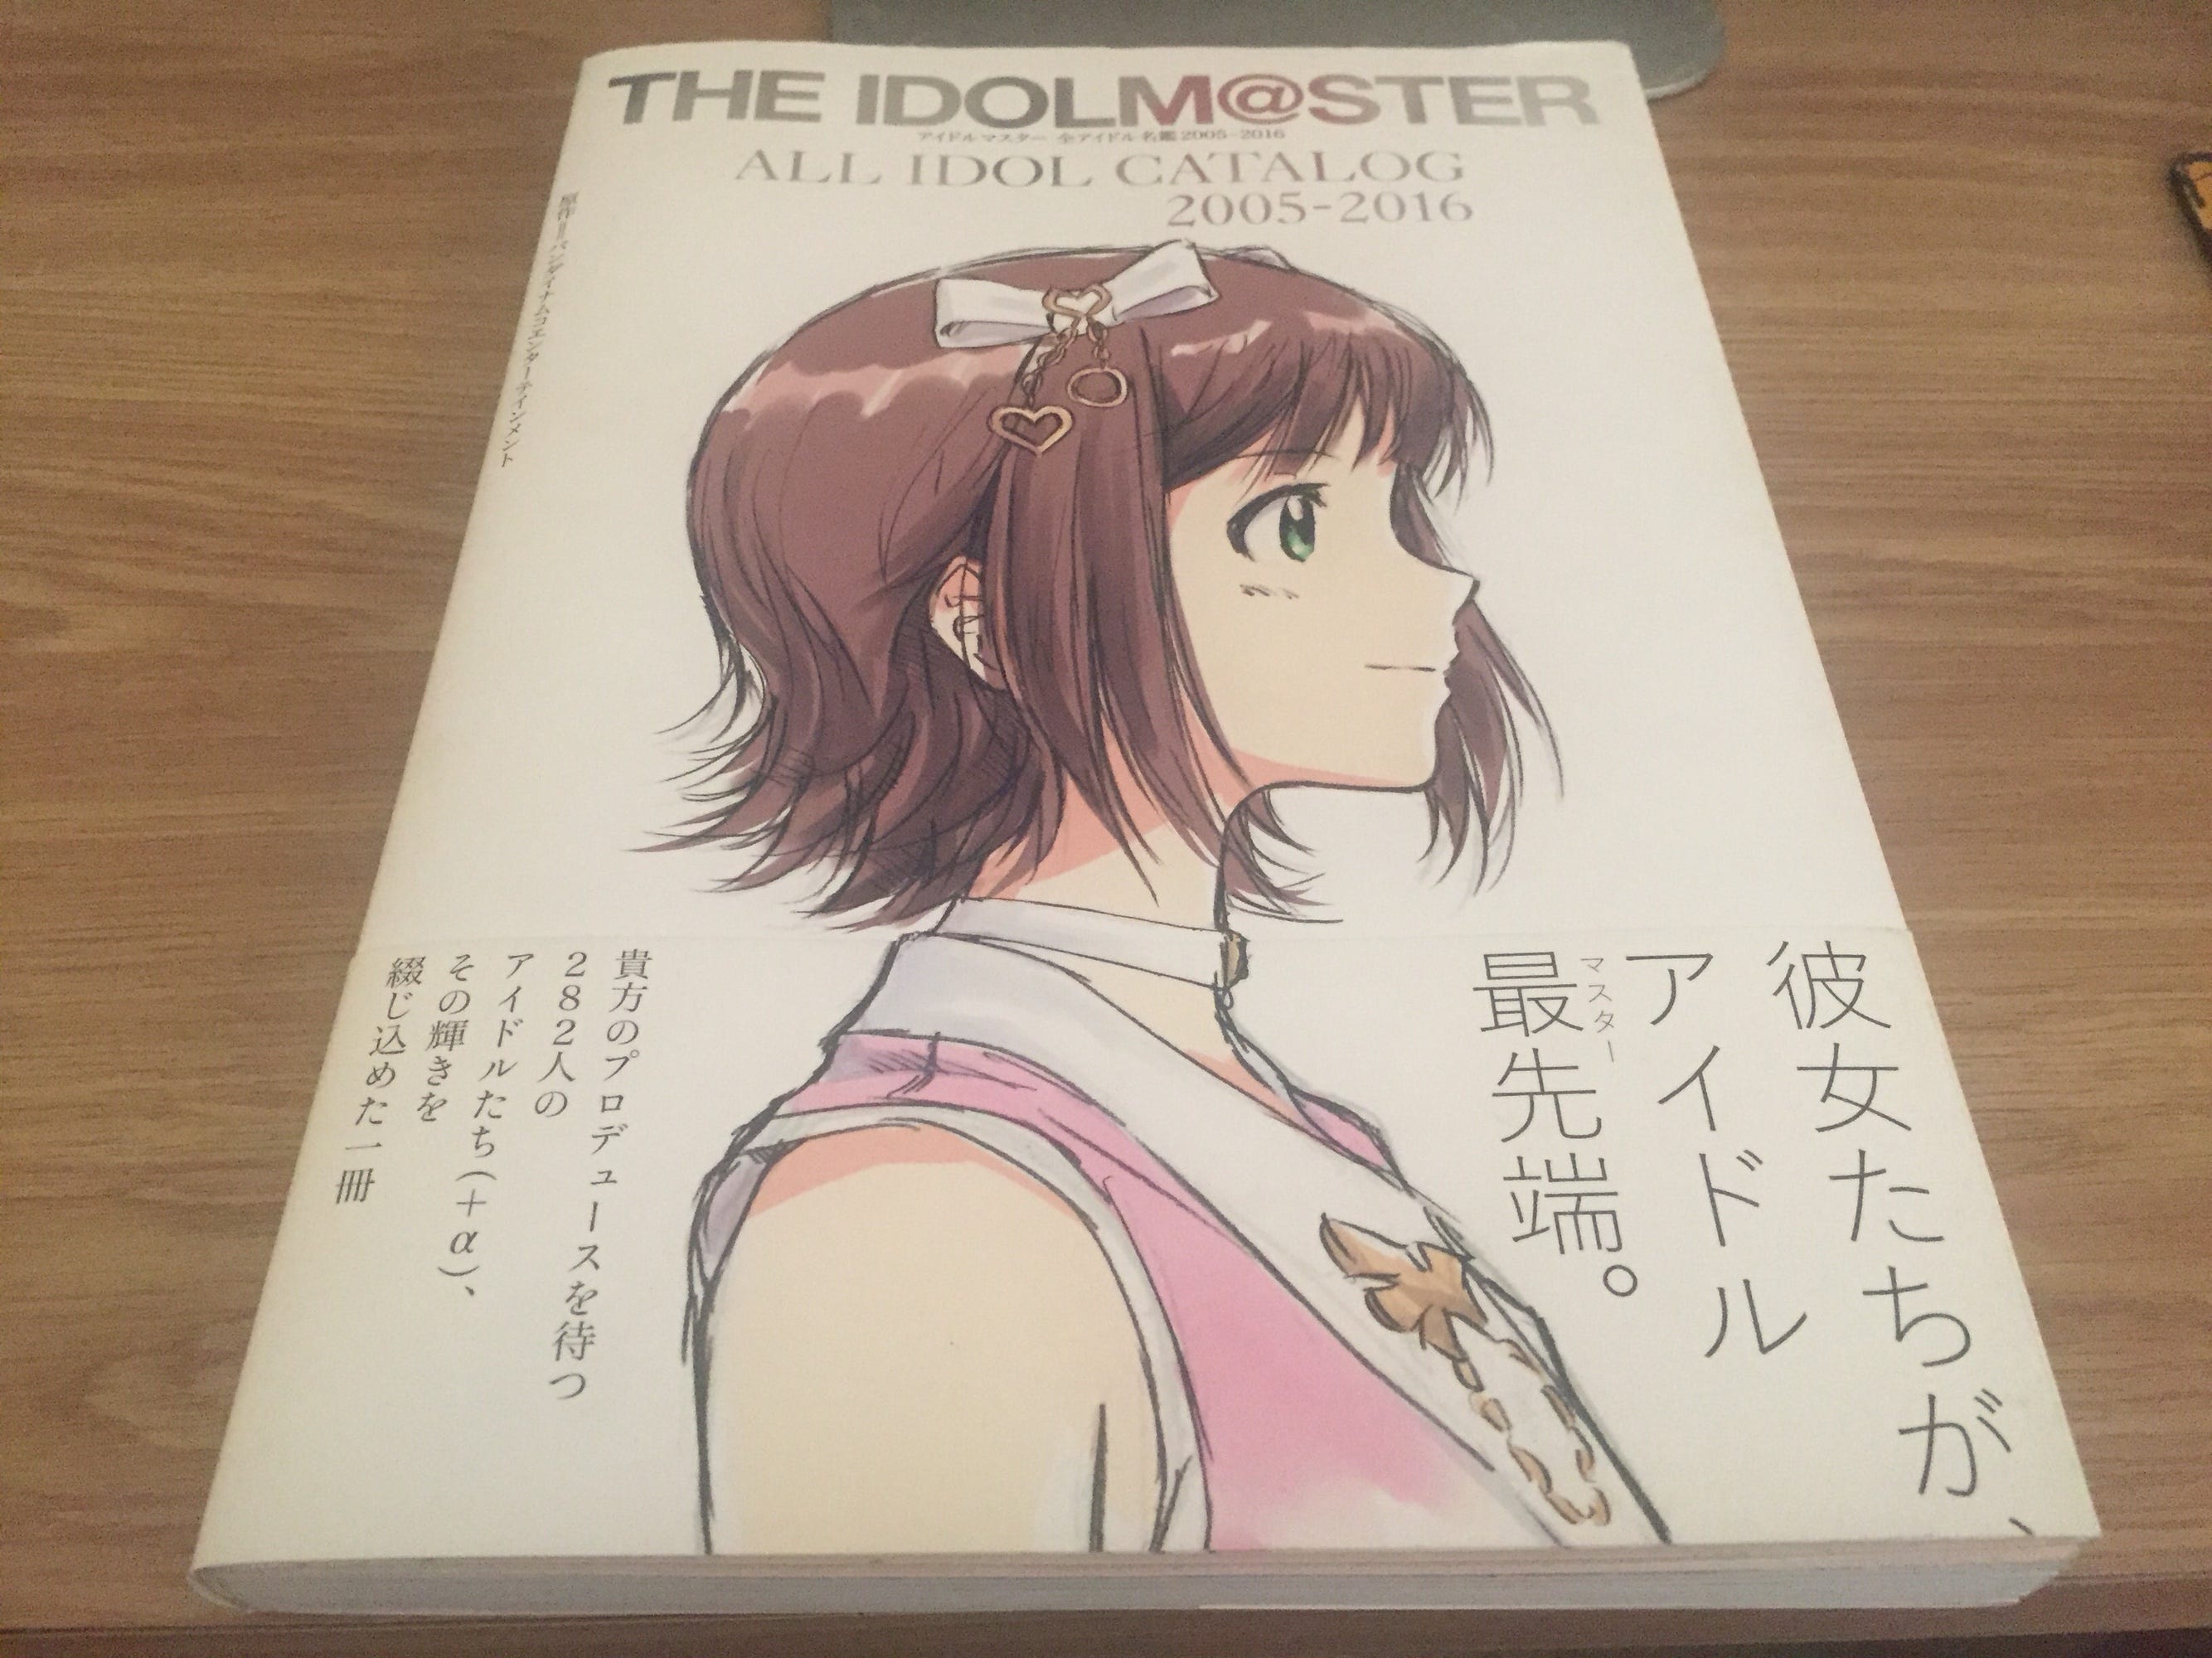 The Database Book For A Massive Idol Franchise By Gid Imma Medium